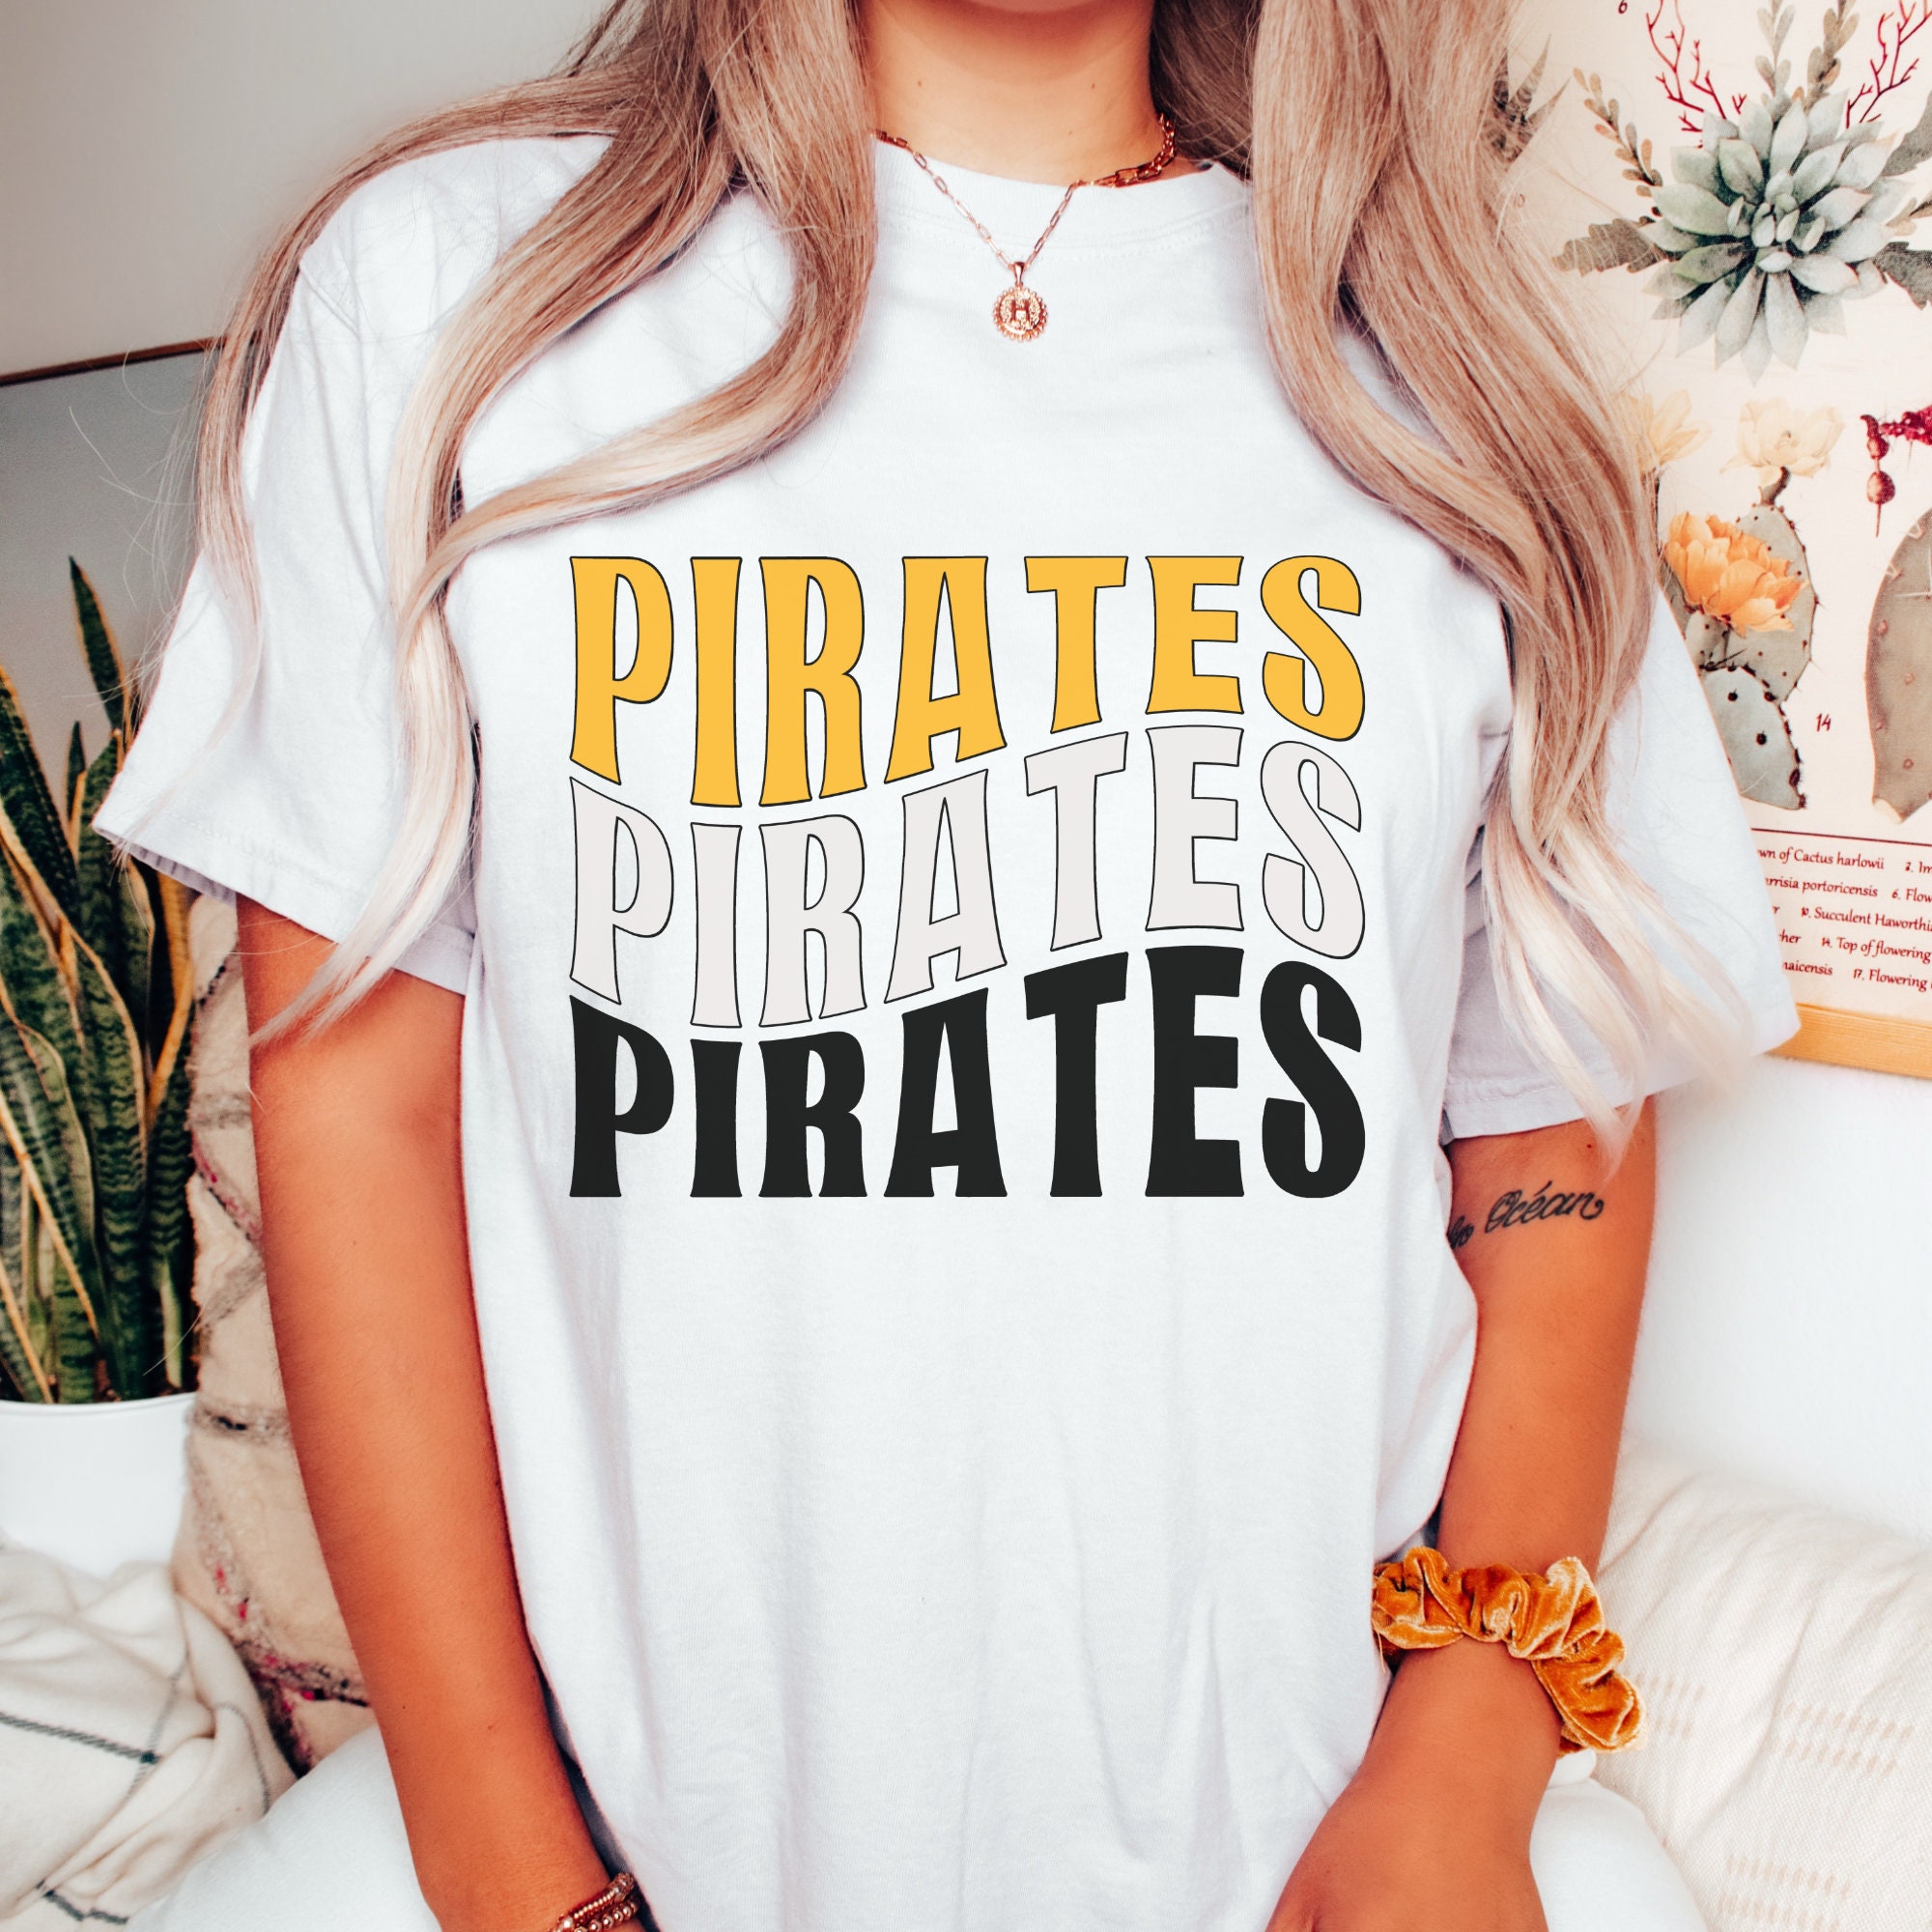 The best vintage Pittsburgh Pirates T-shirts on